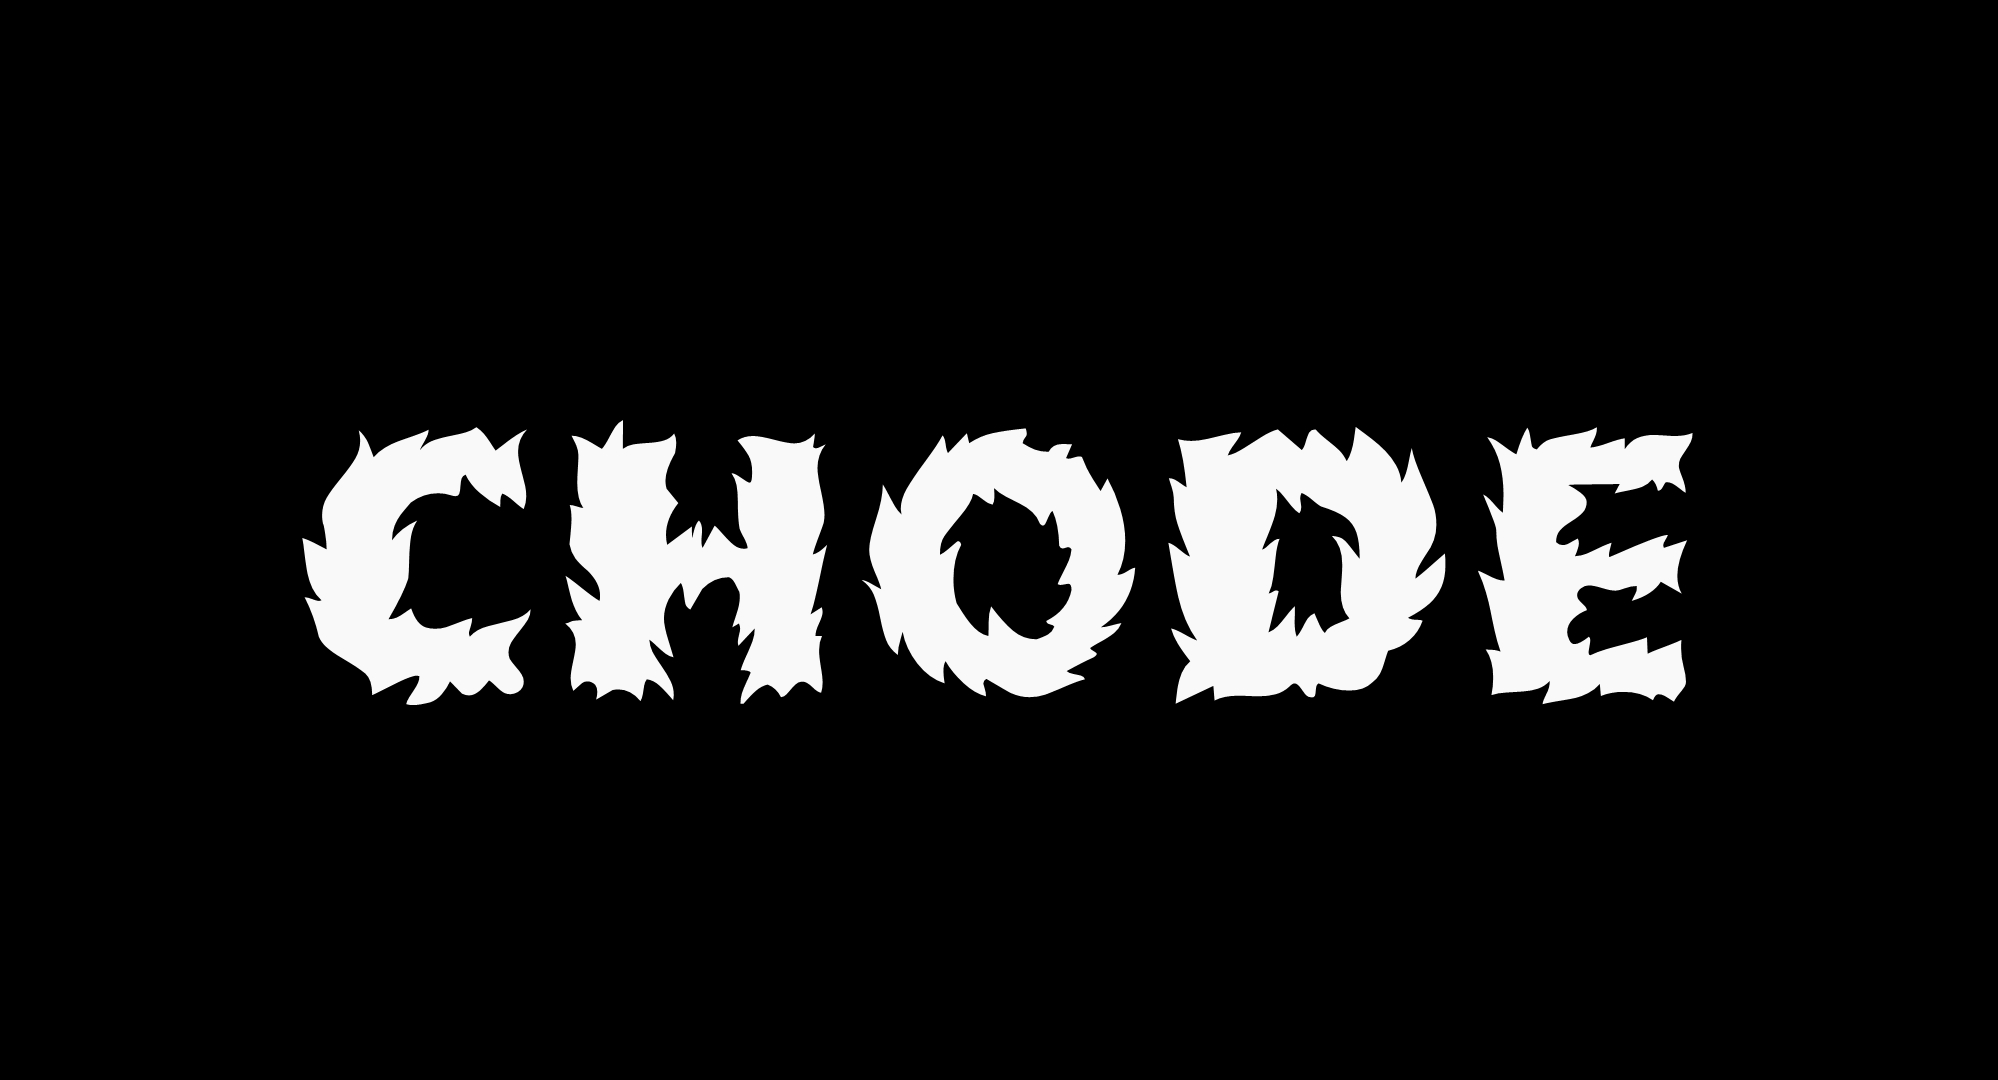 About chode and band